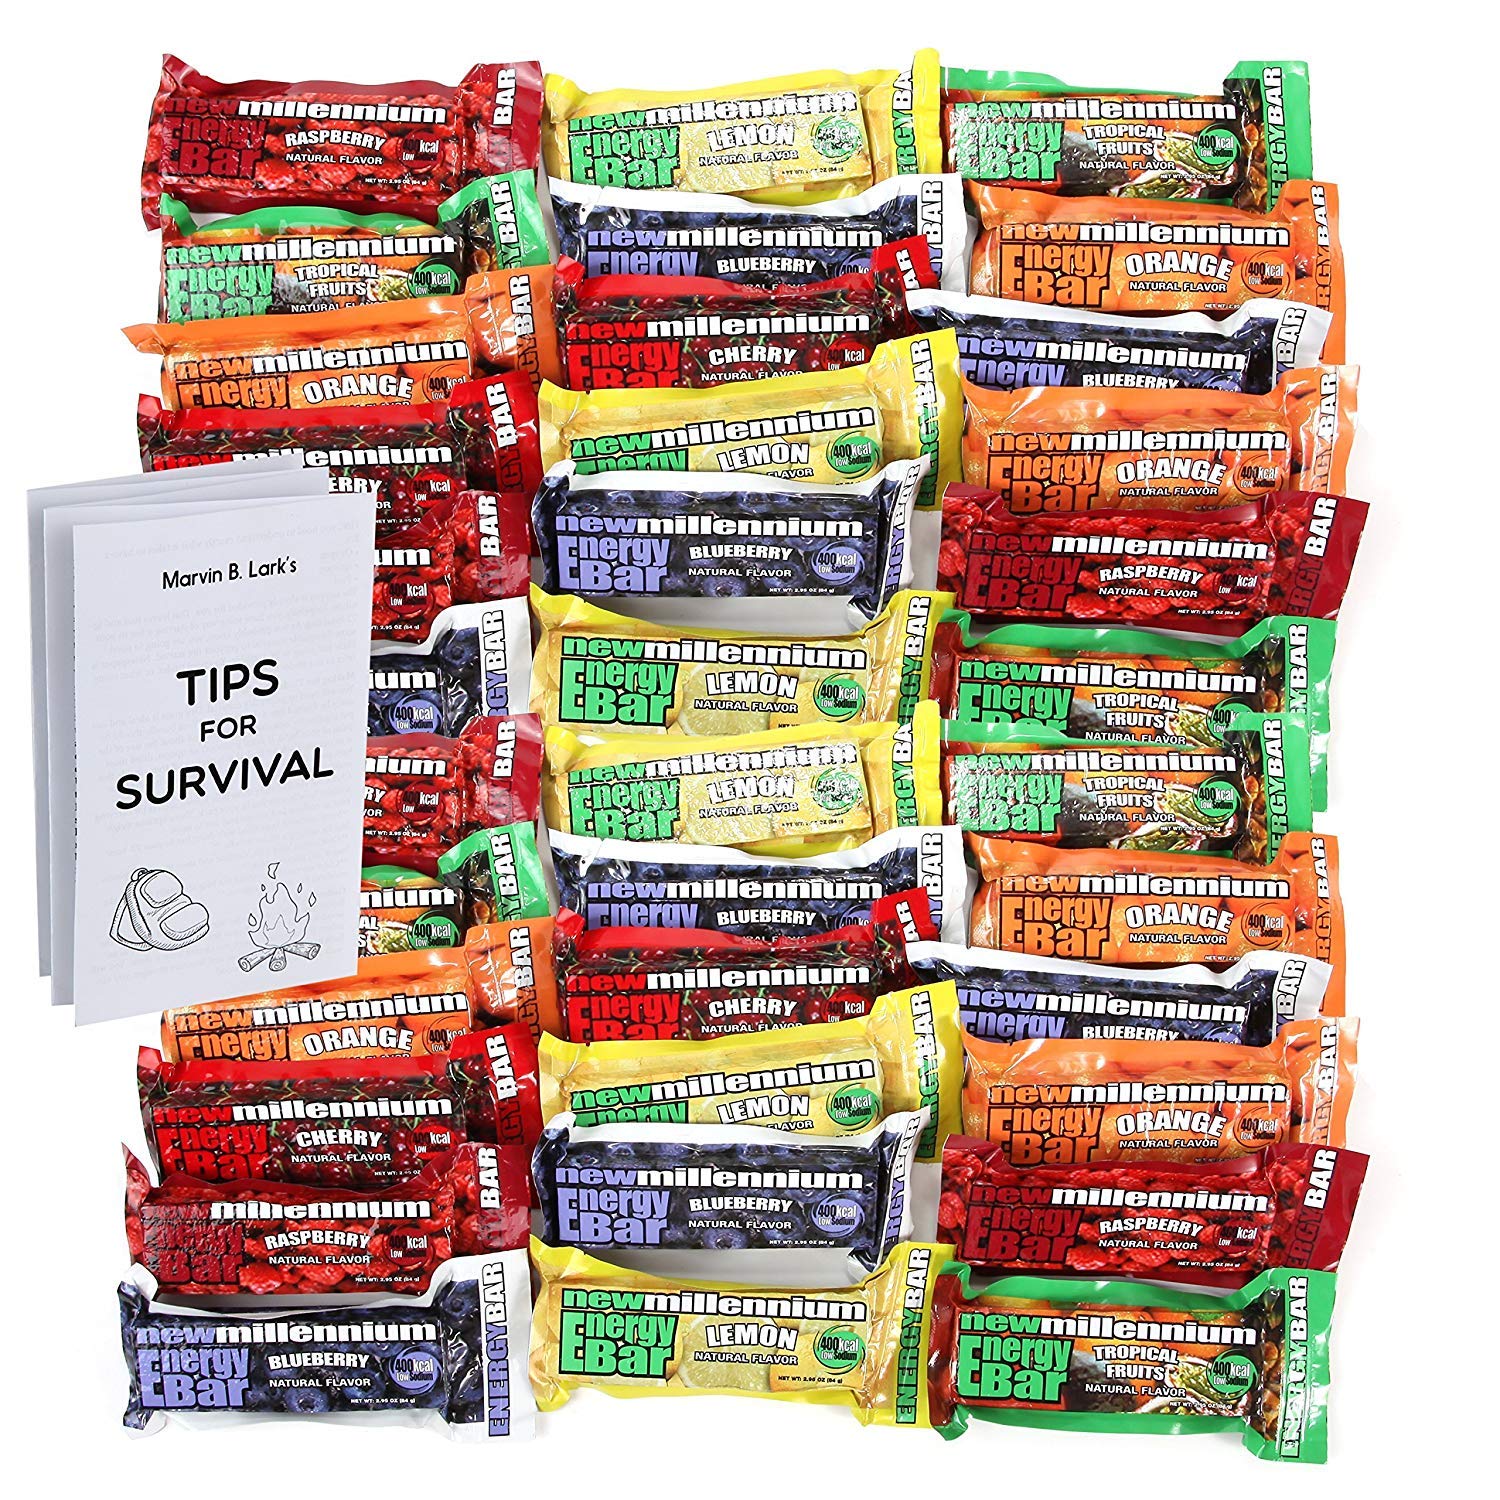 Millennium Assorted Energy Bars (6 Count) - Long Shelf Life Fruit flavored Bar Bundle - Survival Pack for Calamity, Disaster, Hiking and Meal replacement